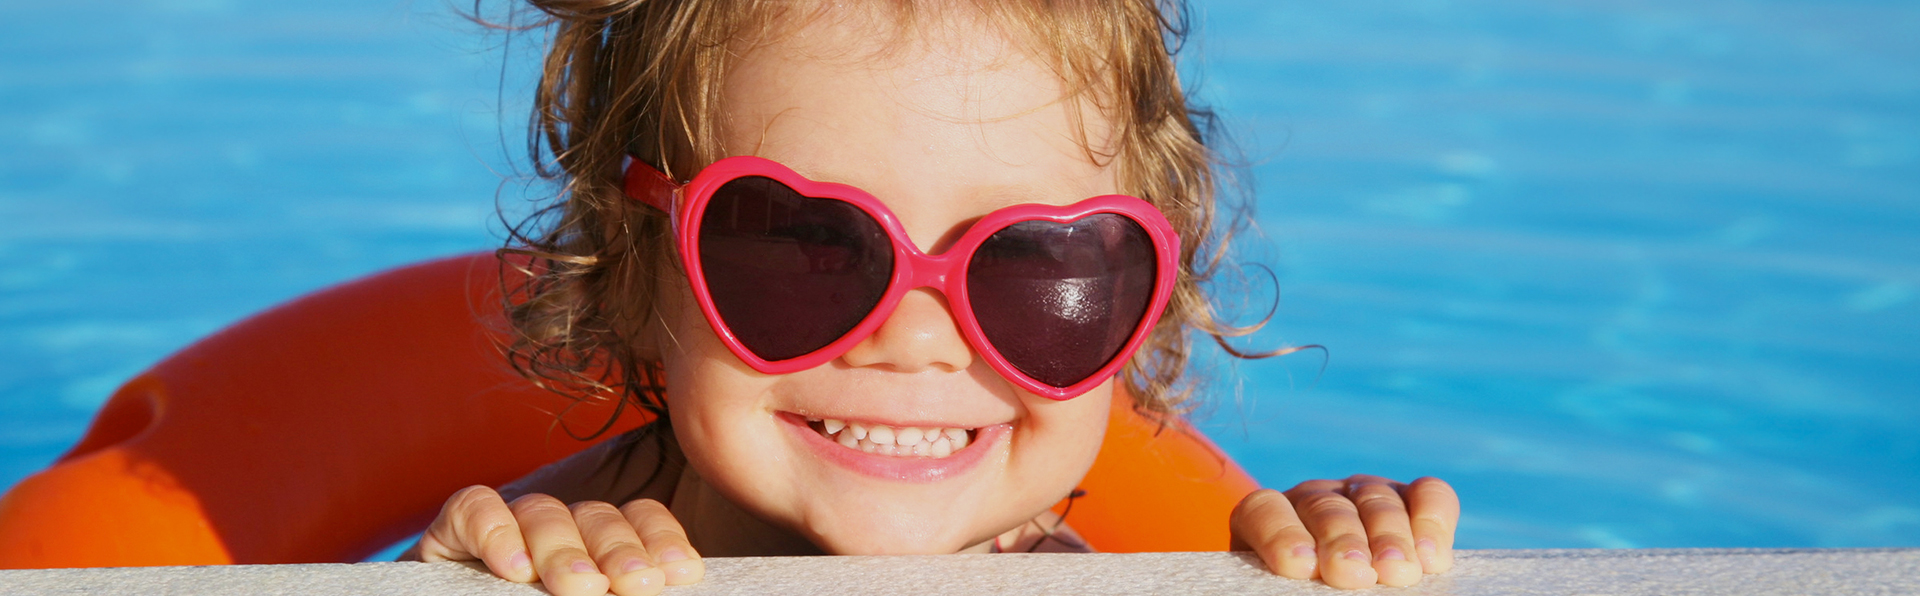 smiling kid with heart sunglasses in the pool 